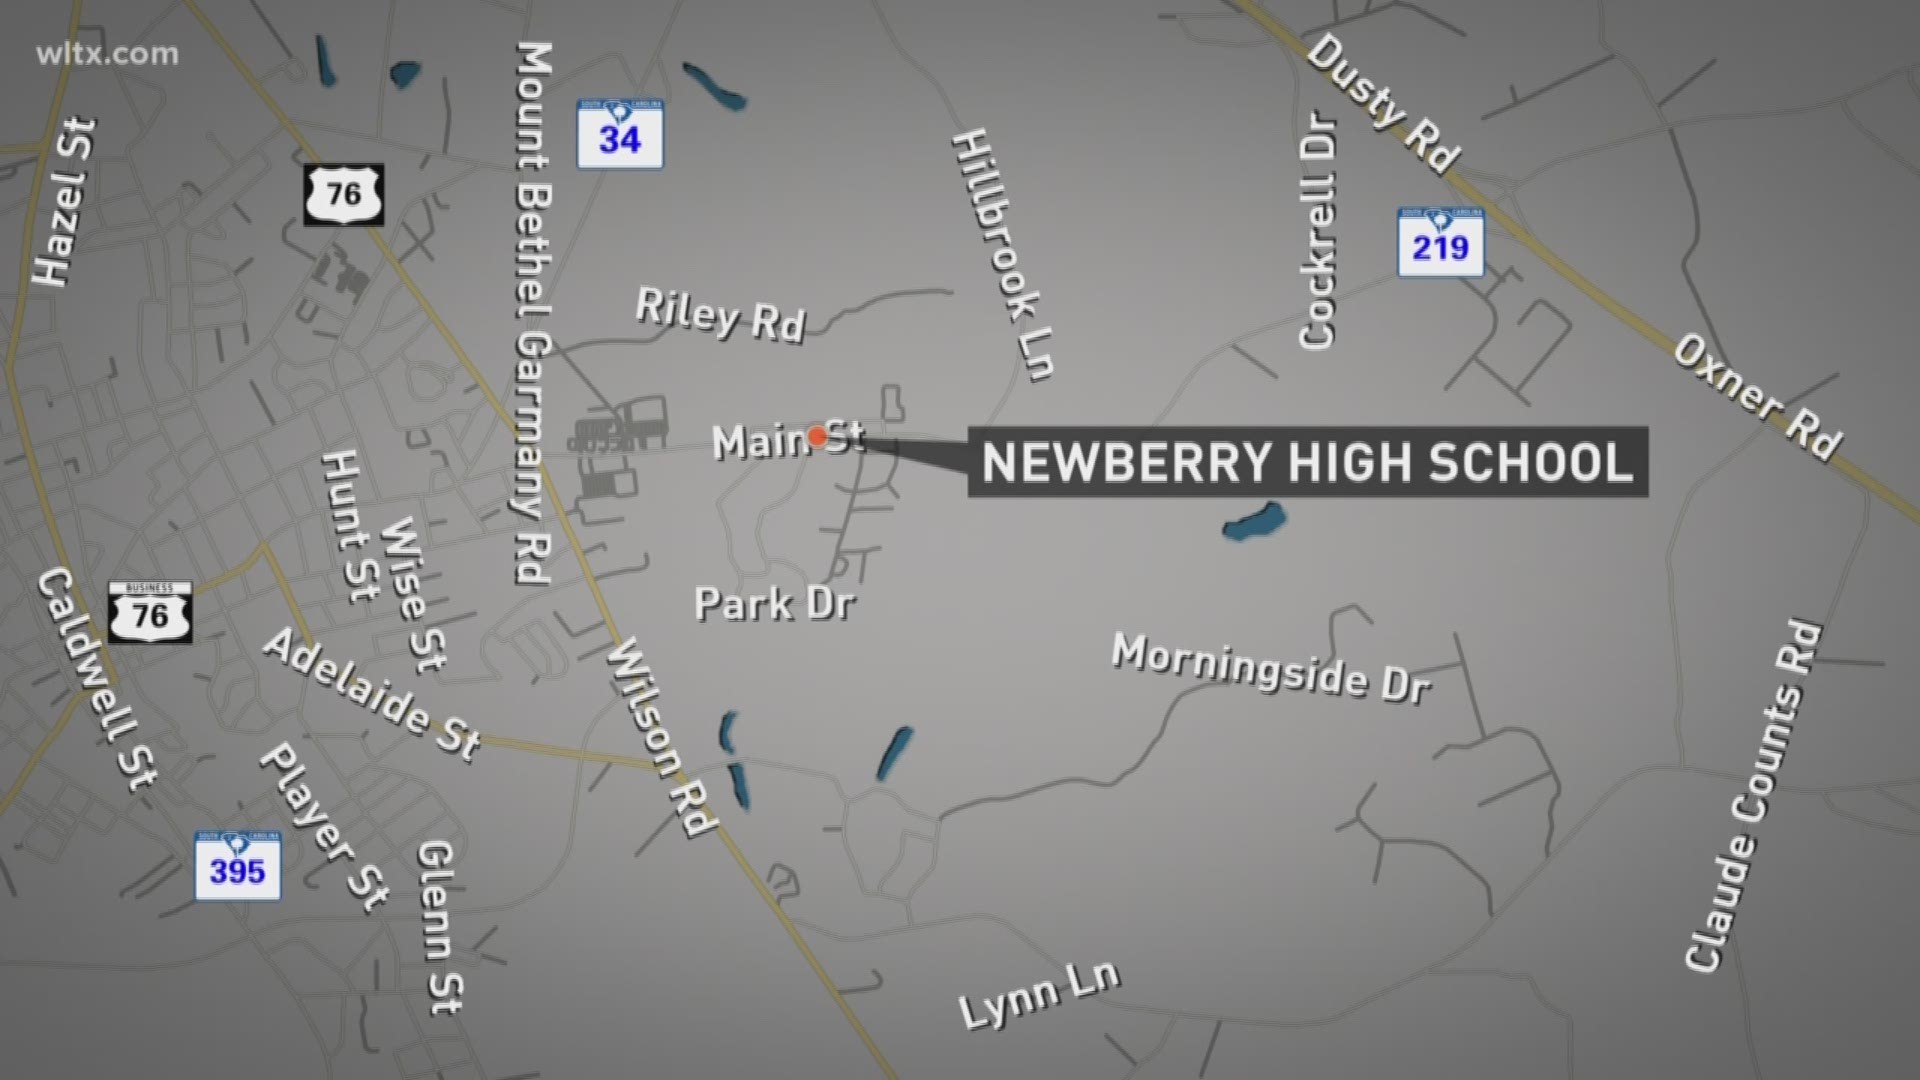 A student had a gun in a bookbag at Newberry High School Tuesday, triggering a lockdown for the campus.